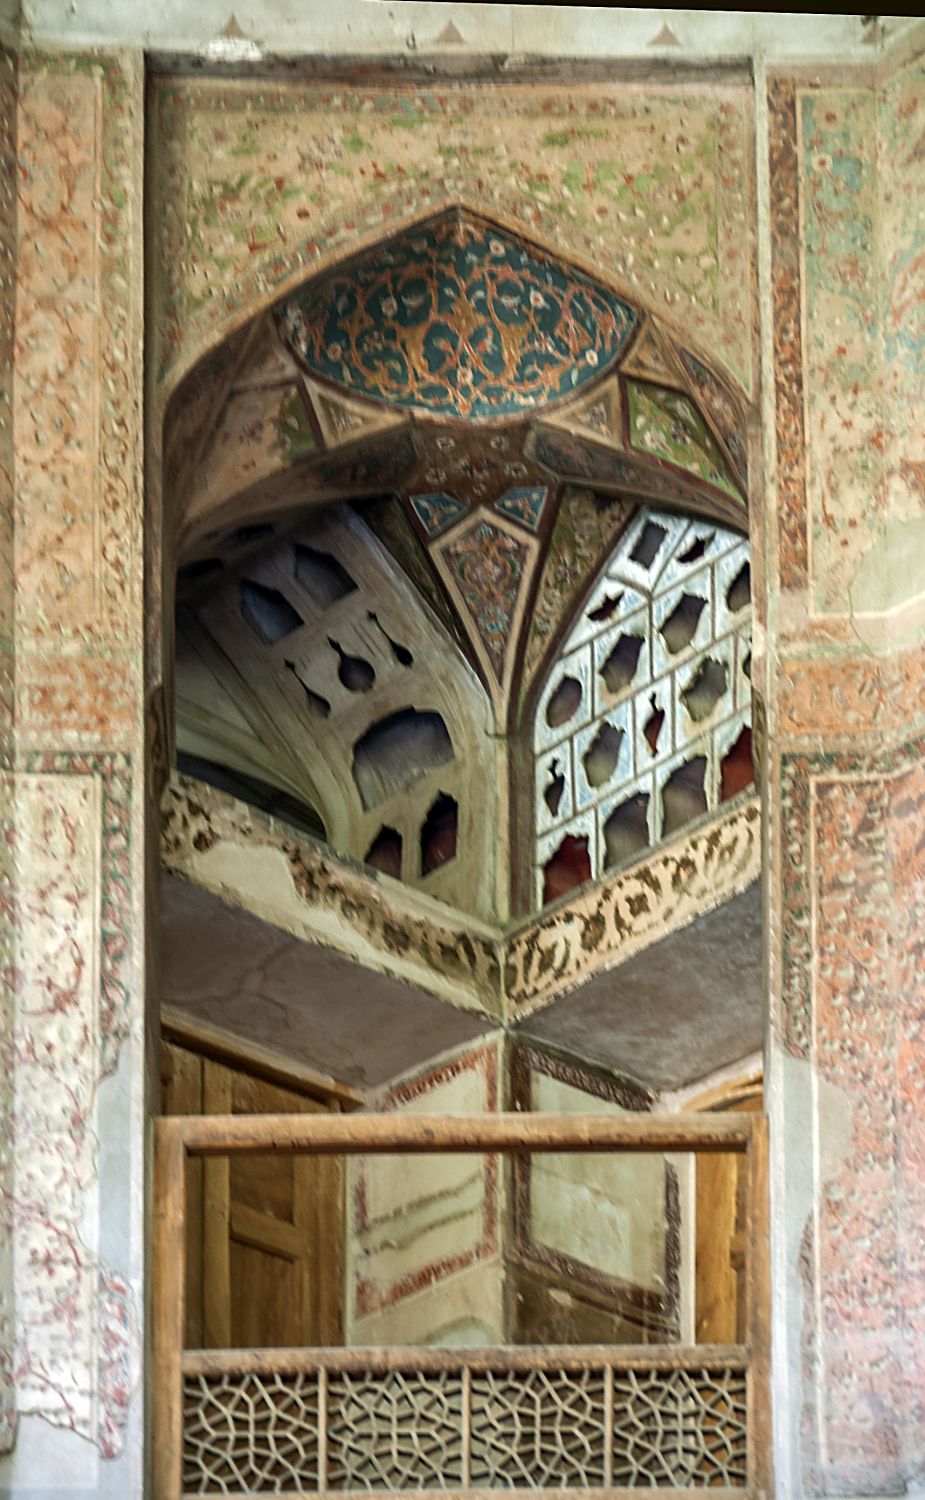 West facade, interior of portico, view into second story gallery with painted vault and perforated stucco decoration. 